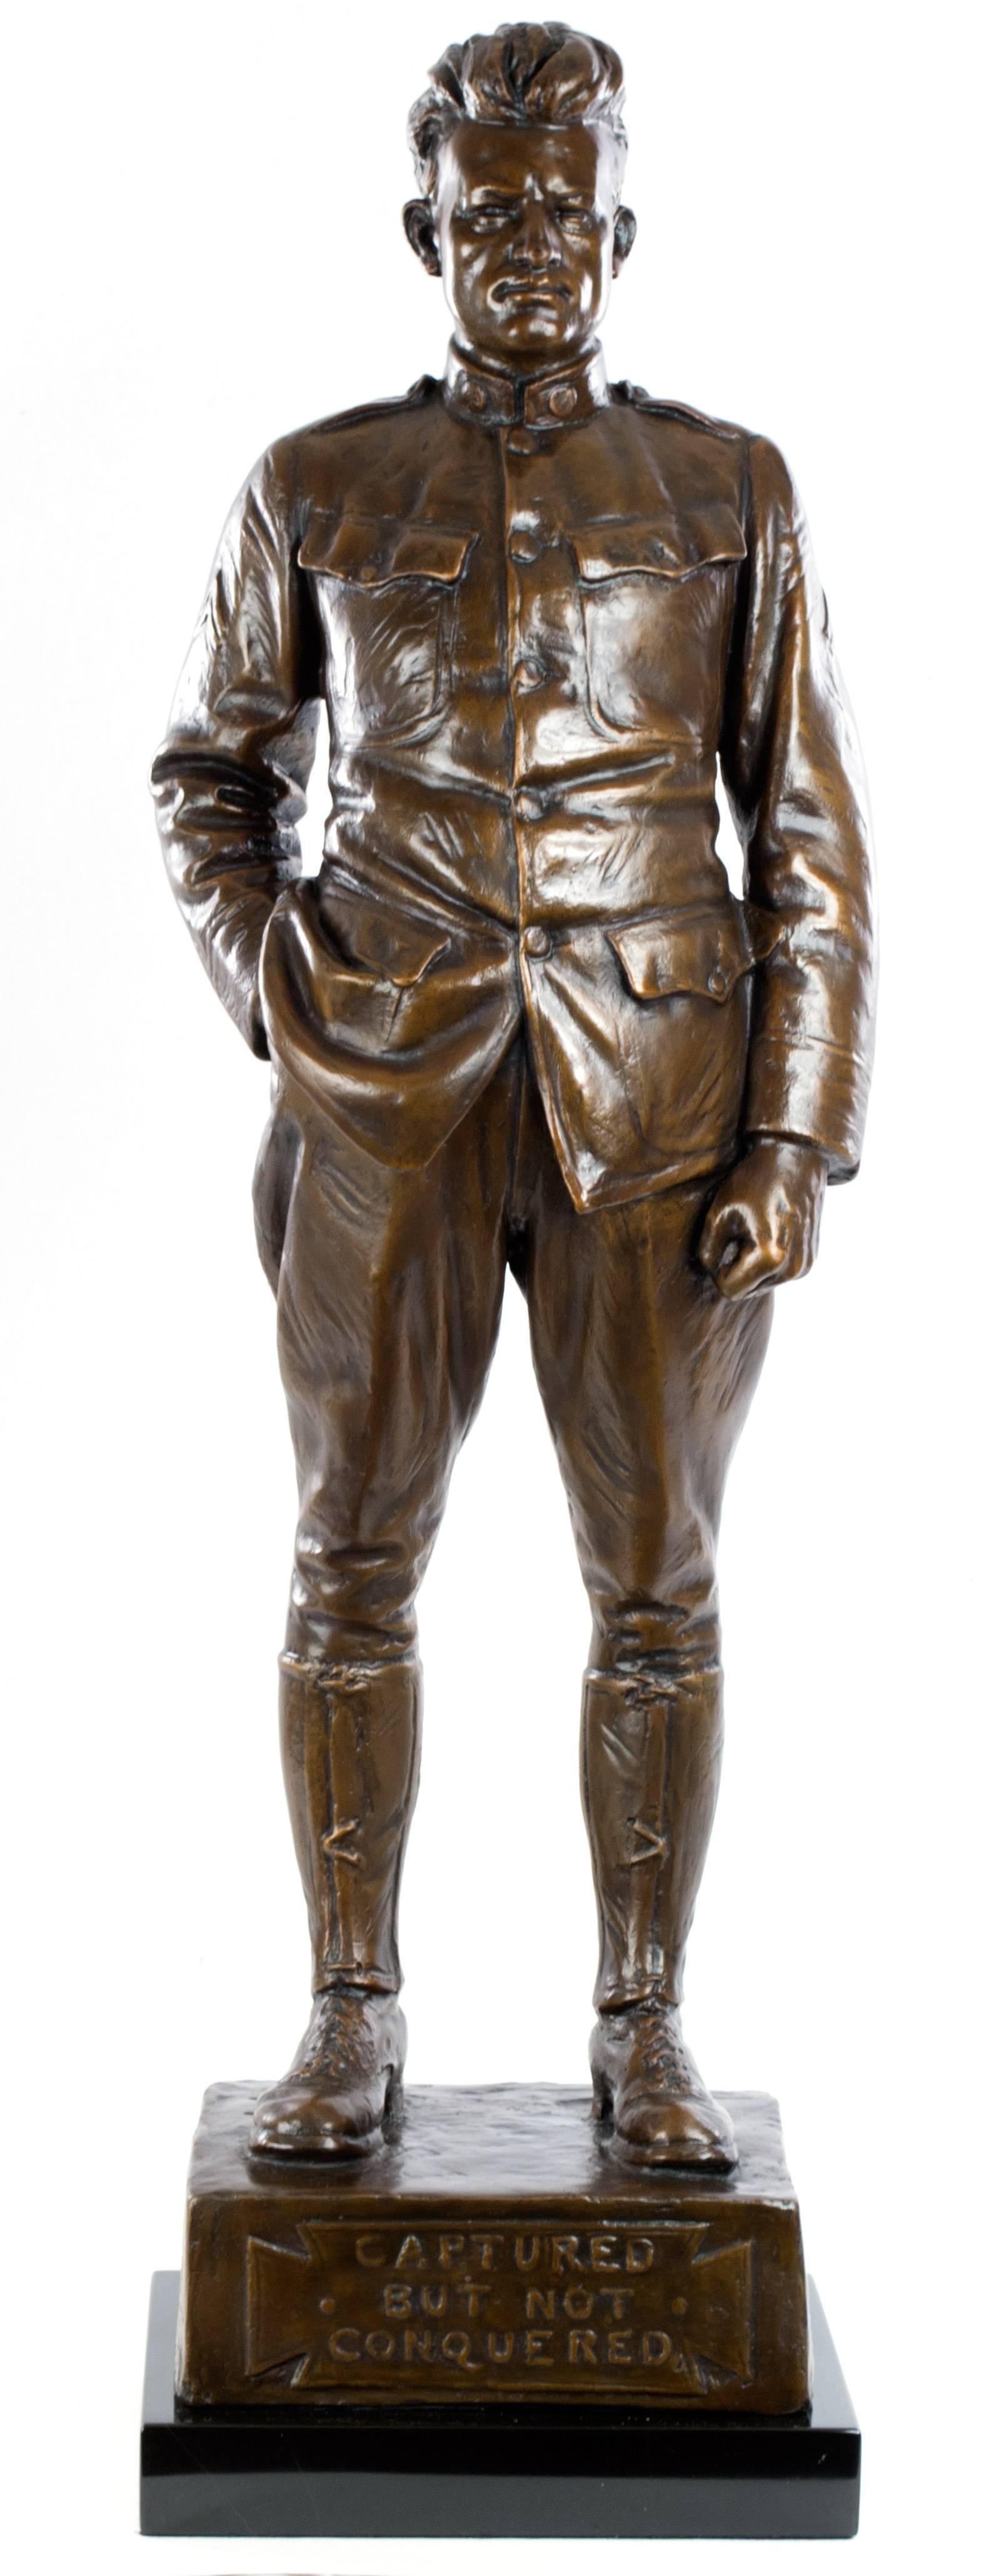 One of Dallin's most personal sculptures, Captured but not conquered, depicts, Edgar M. Halyburton, a WWI hero and one of the first Americans captured in the war. For his model, Dallin used his third and only surviving son, Arthur. Arthur Dallin